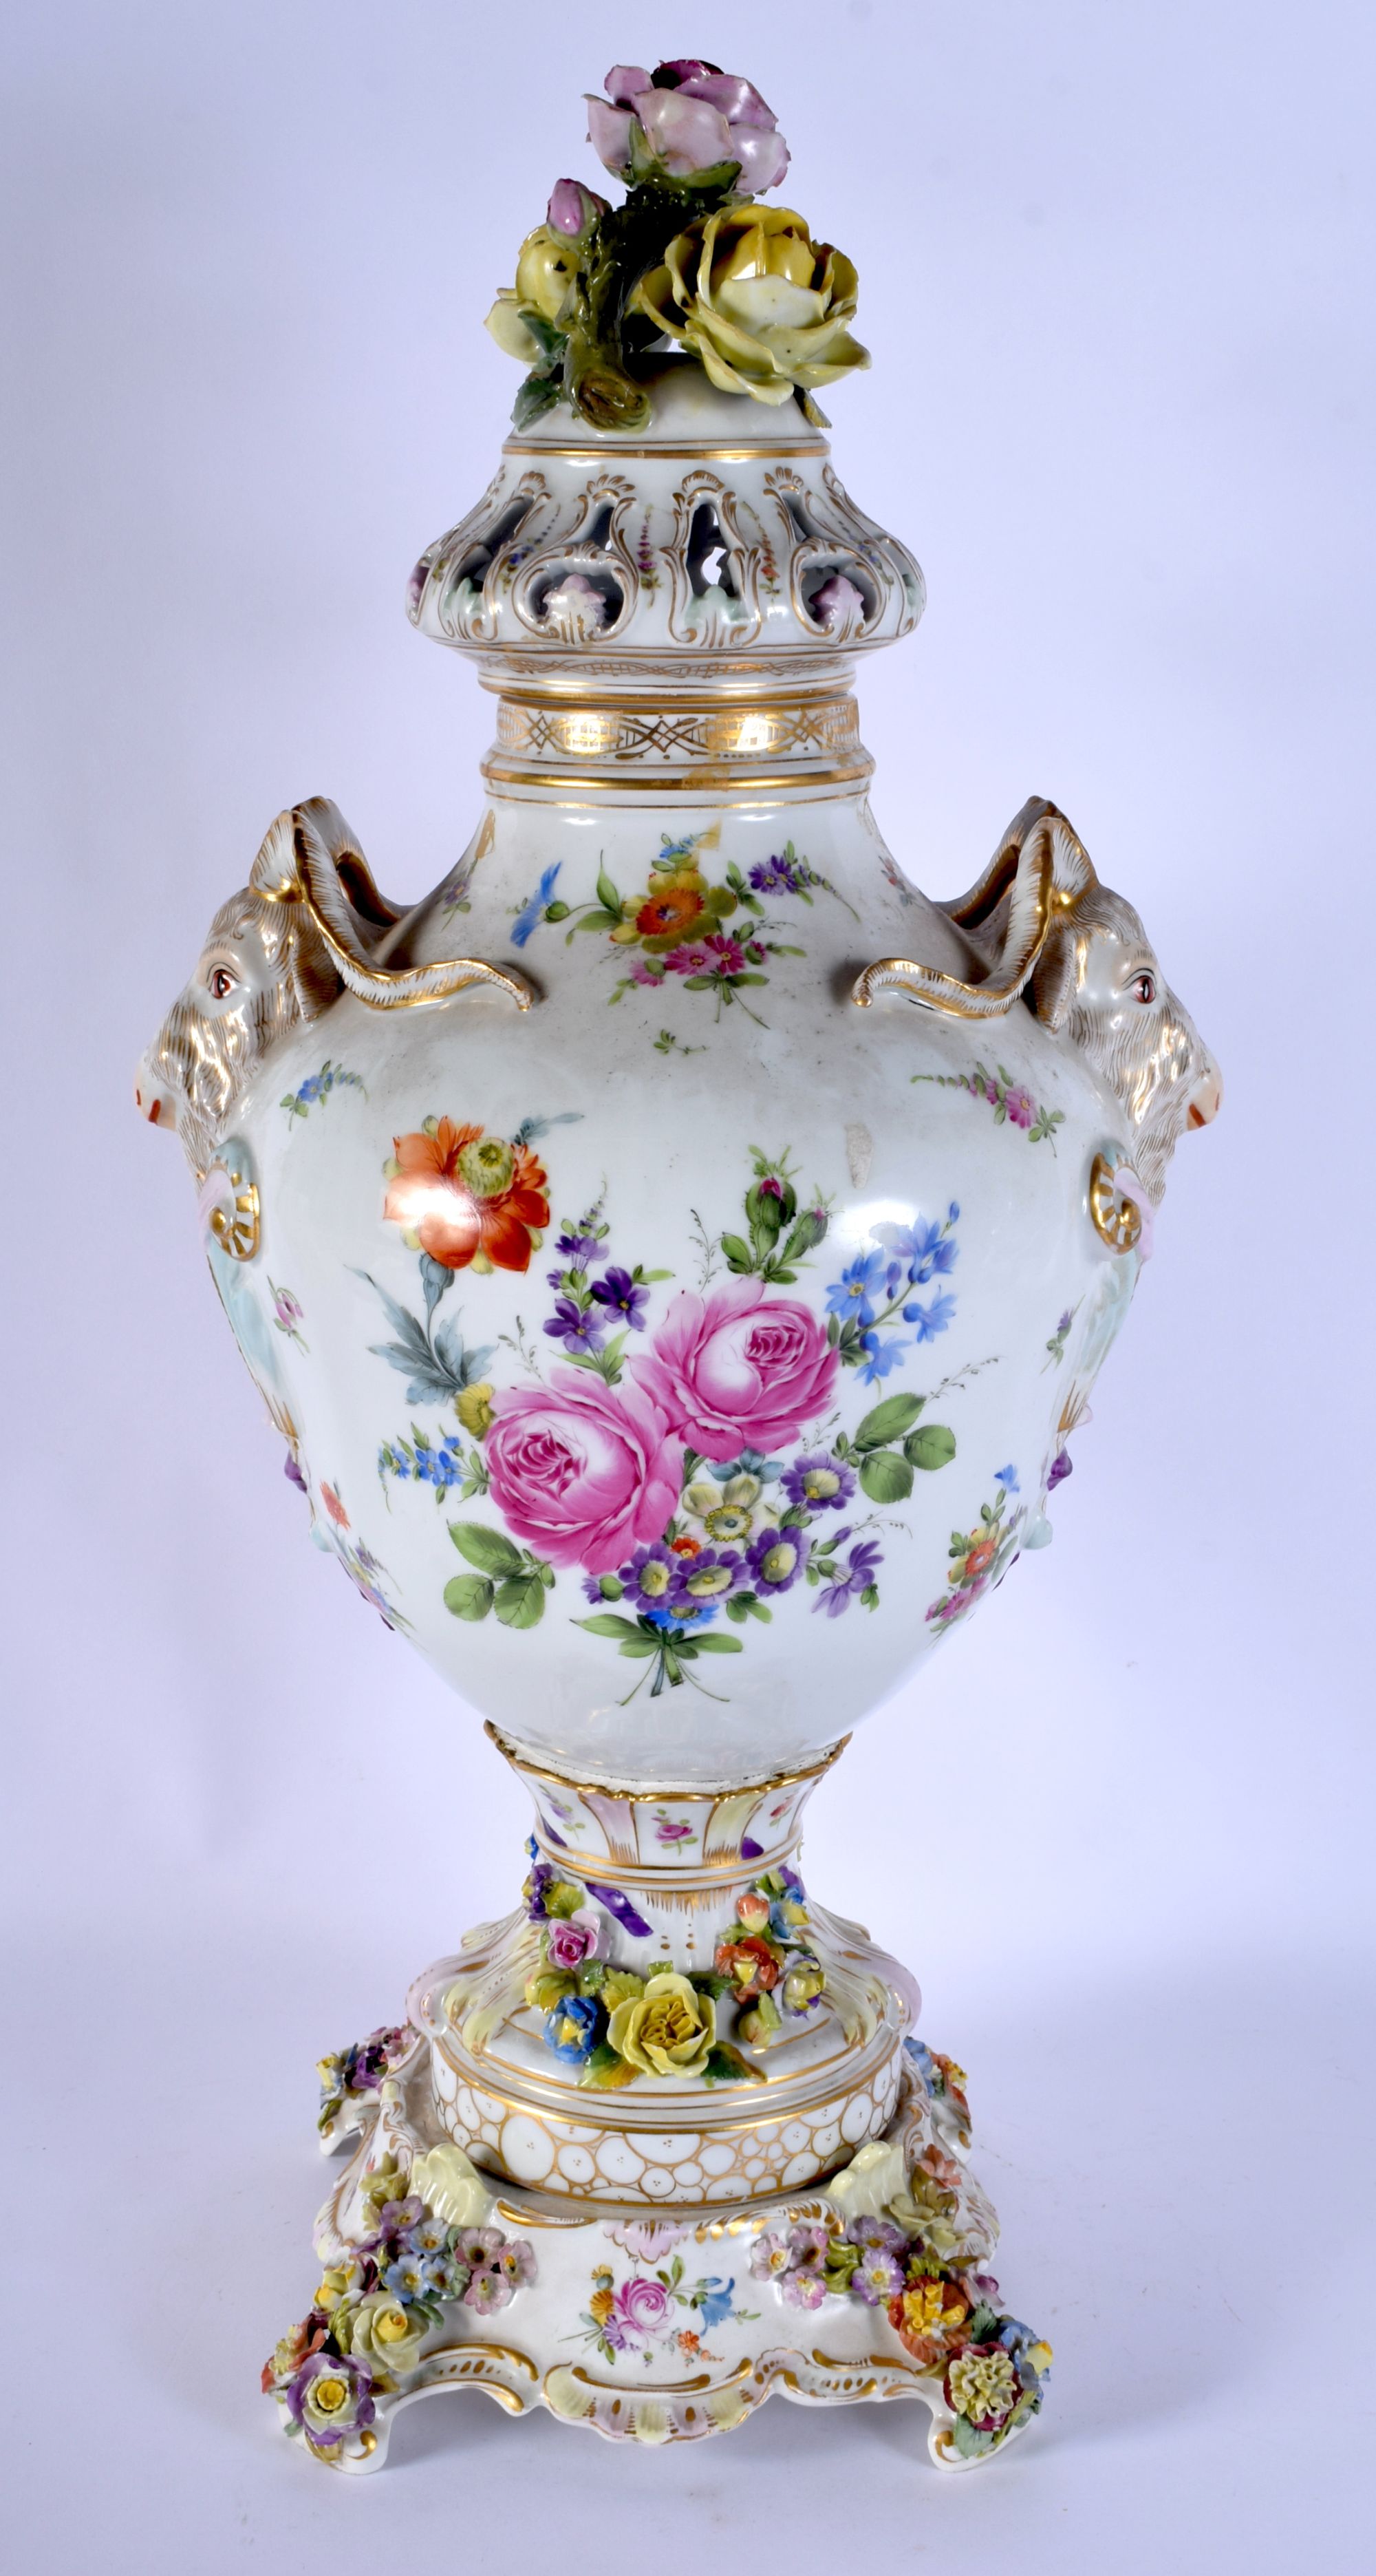 A LARGE ANTIQUE DRESDEN PORCELAIN VASE AND COVER with stand, painted with figures. 60 cm x 18 cm. - Image 3 of 9